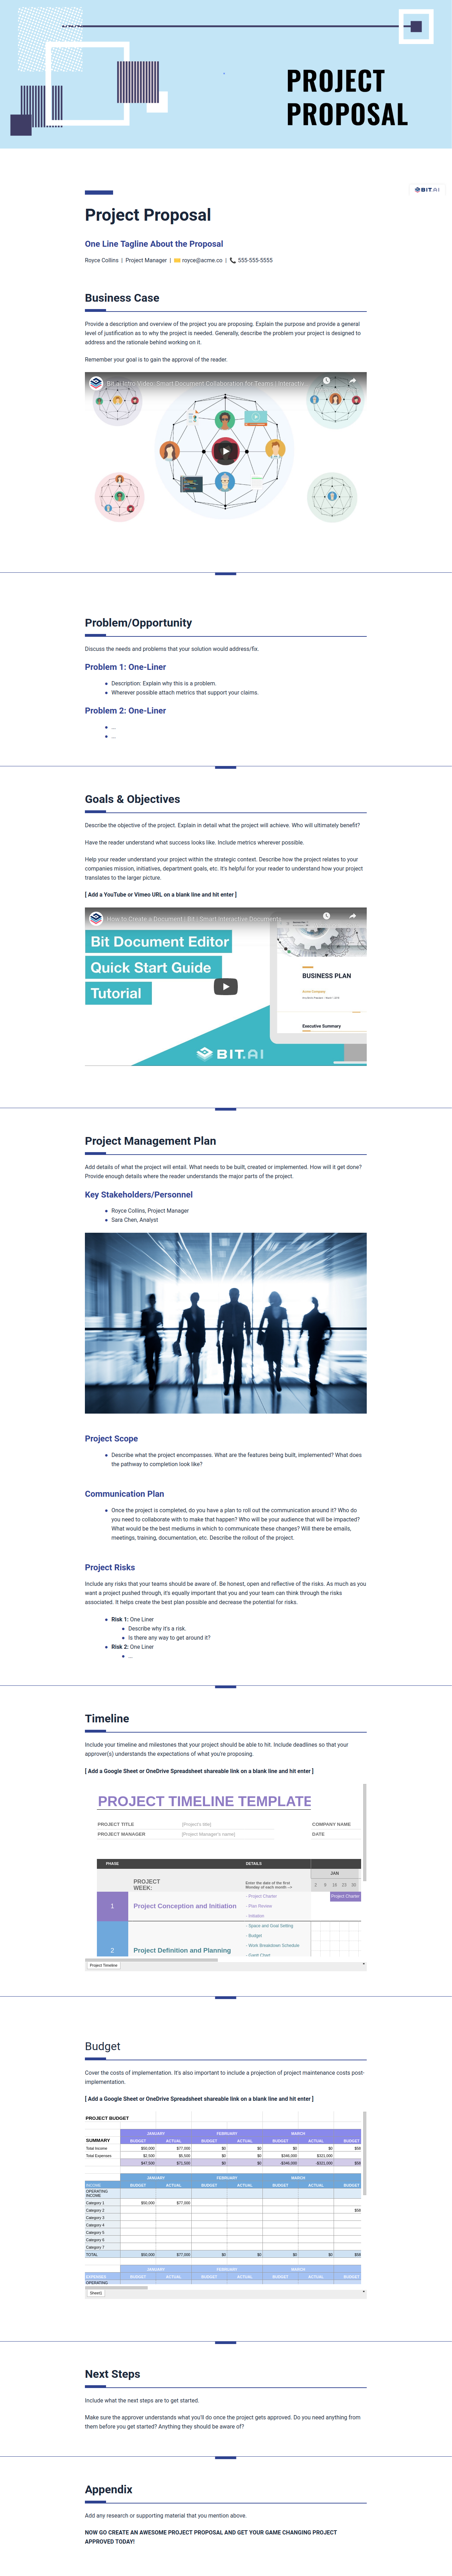 Project proposal template